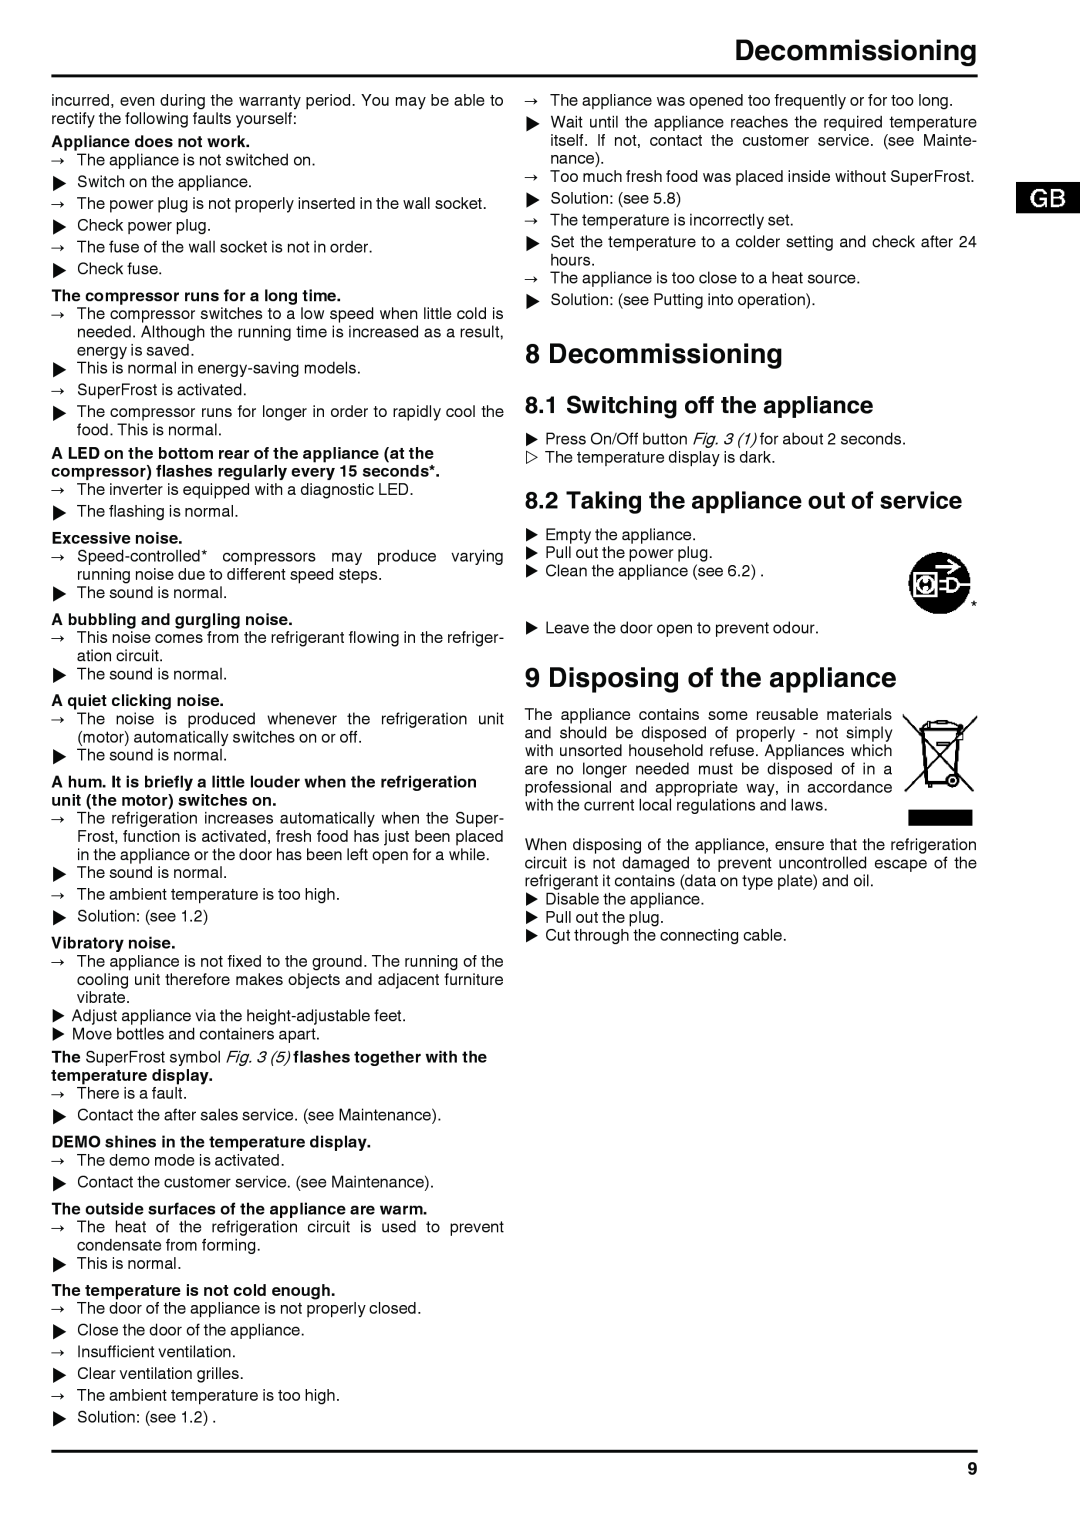 Liebherr 7081998-0 operating instructions Decommissioning, Disposing of the appliance, Switching off the appliance 